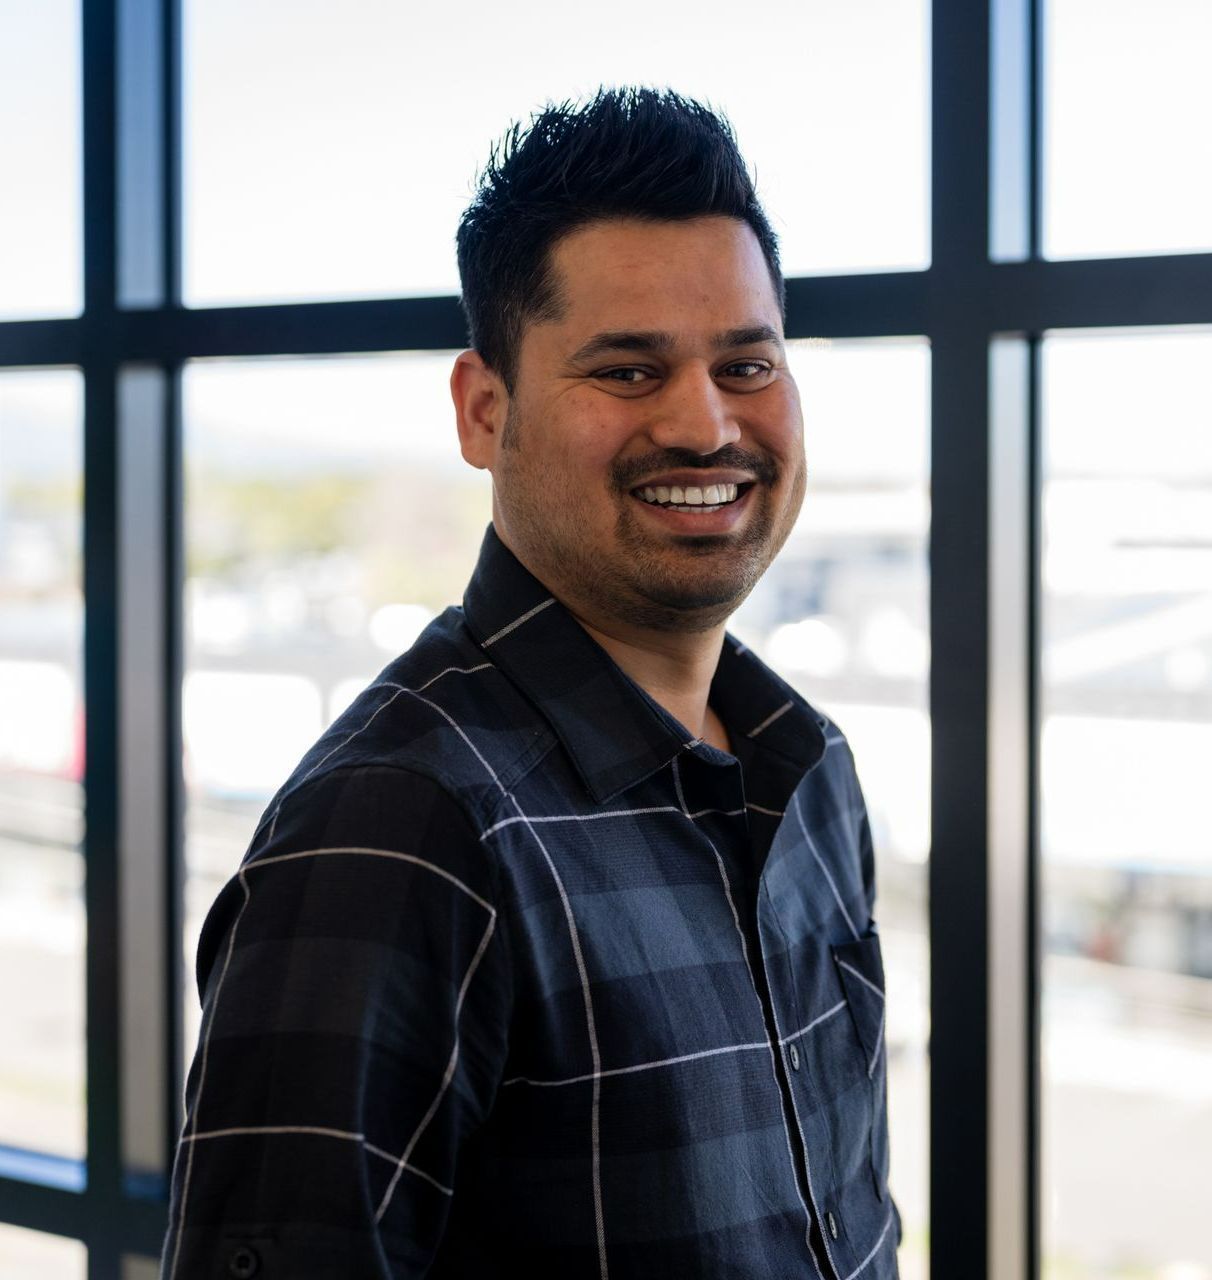 Manish Rawat in a plaid shirt is smiling in front of a window